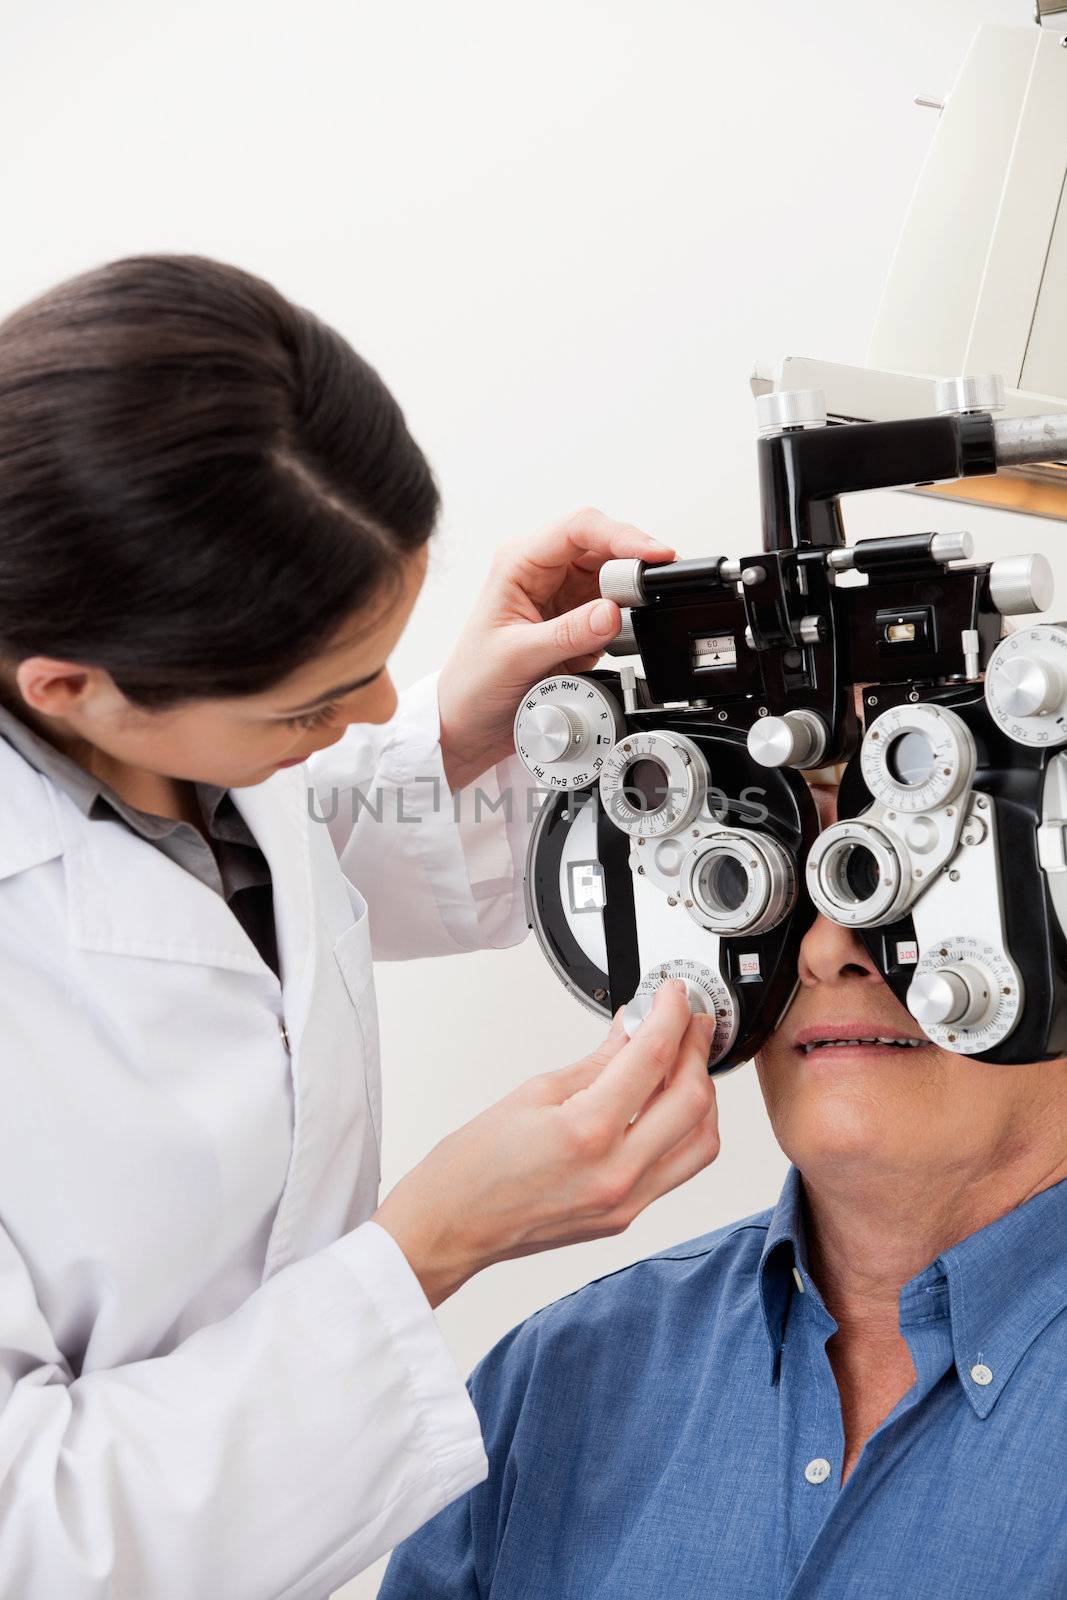 Eye Examination With Phoropter by leaf